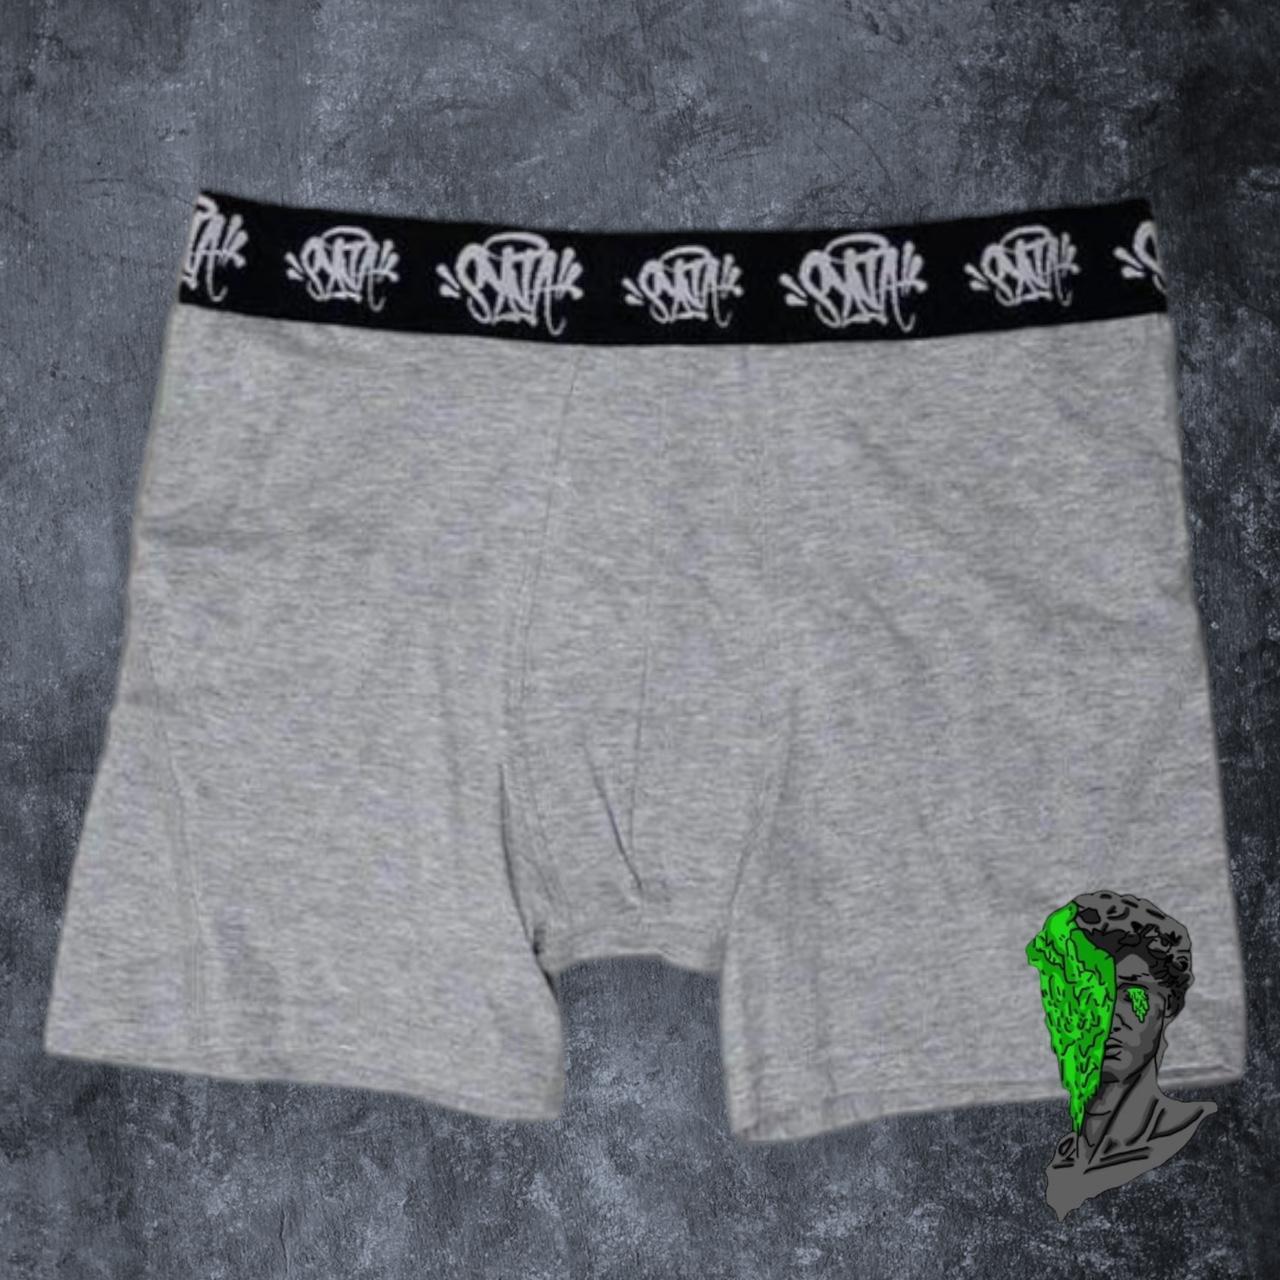 Syna World boxer brief pants X3 Small White, grey,... - Depop